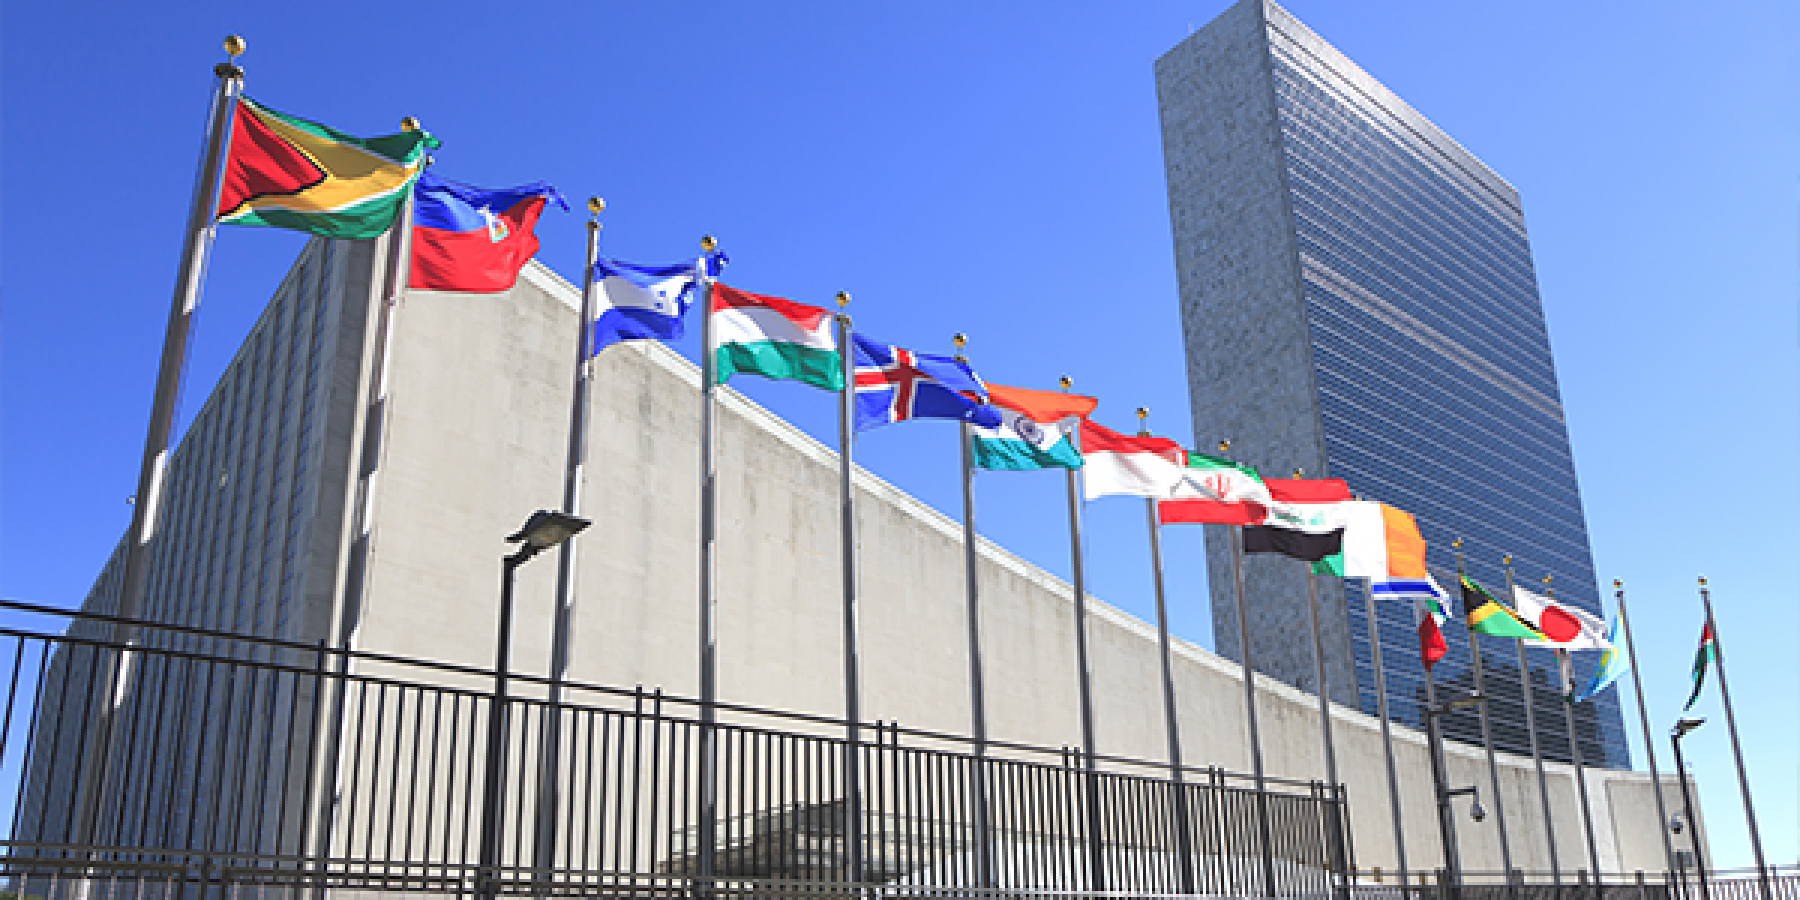  Nations Unie, NYC | © Shutterstock